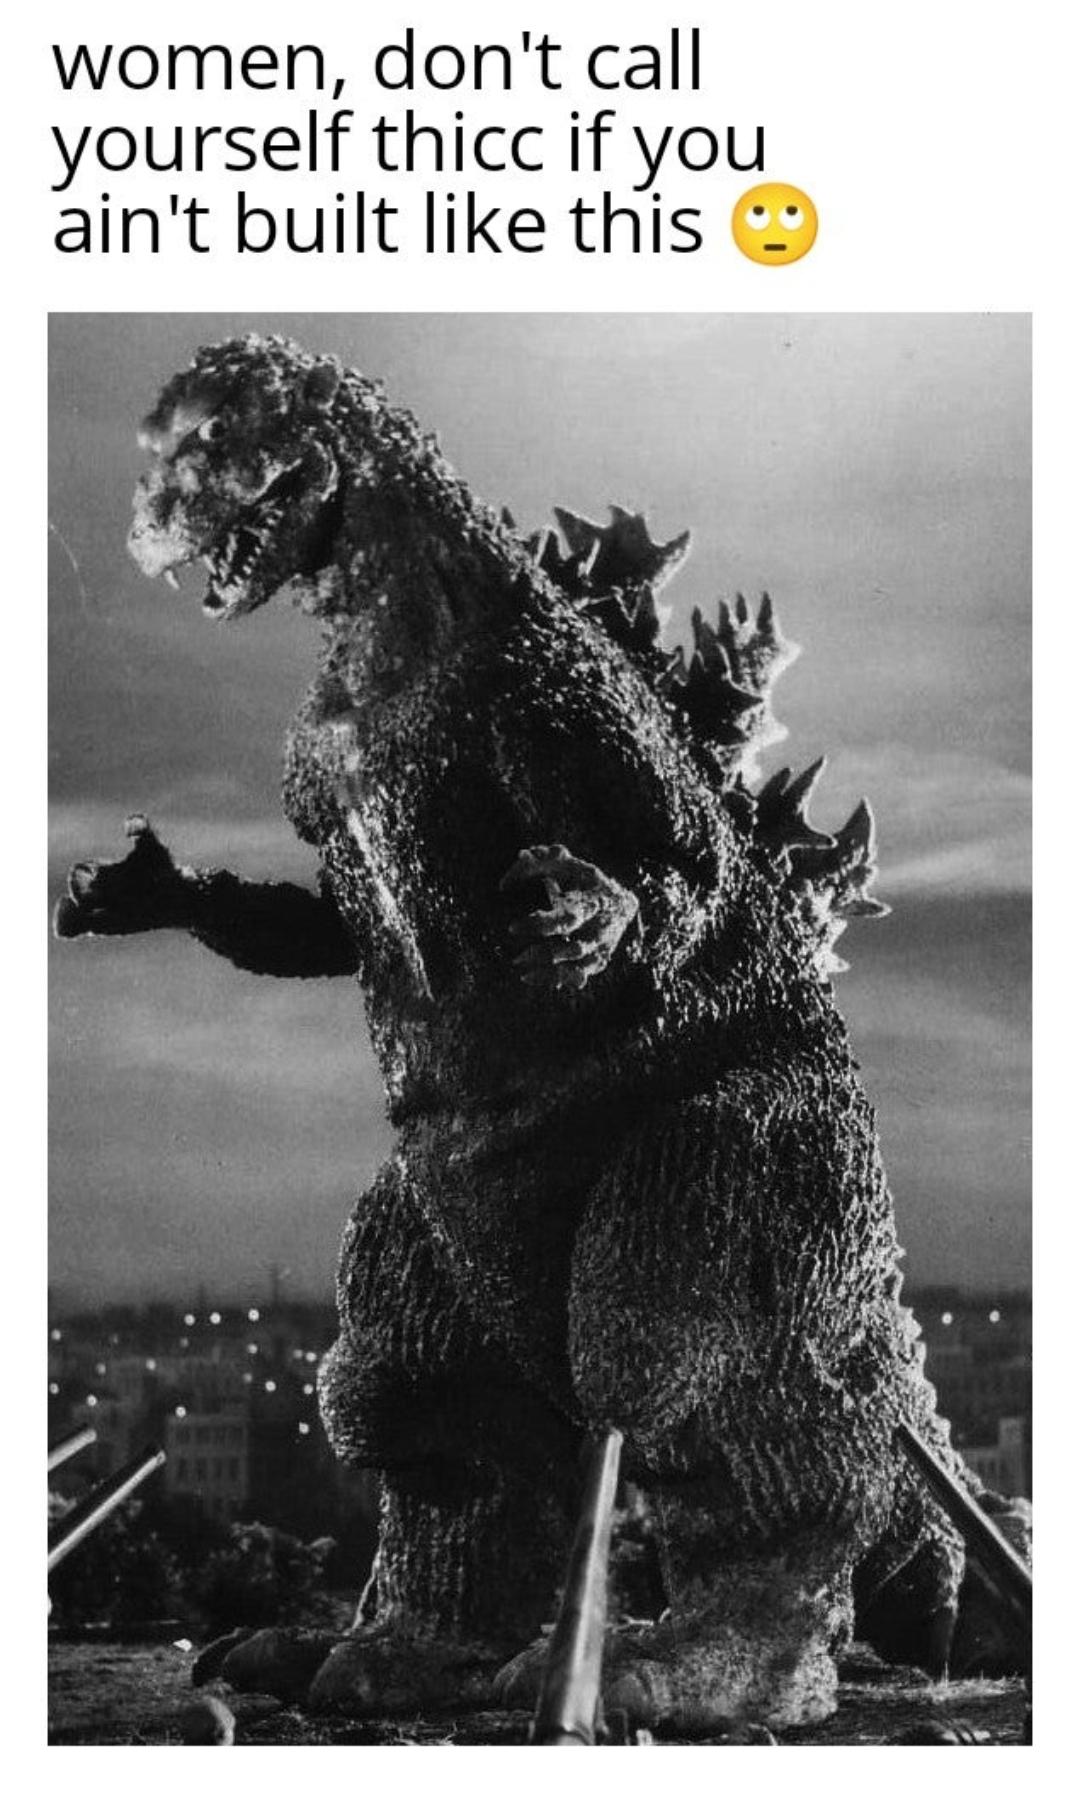 godzilla 1954 - women, don't call yourself thicc if you ain't built this